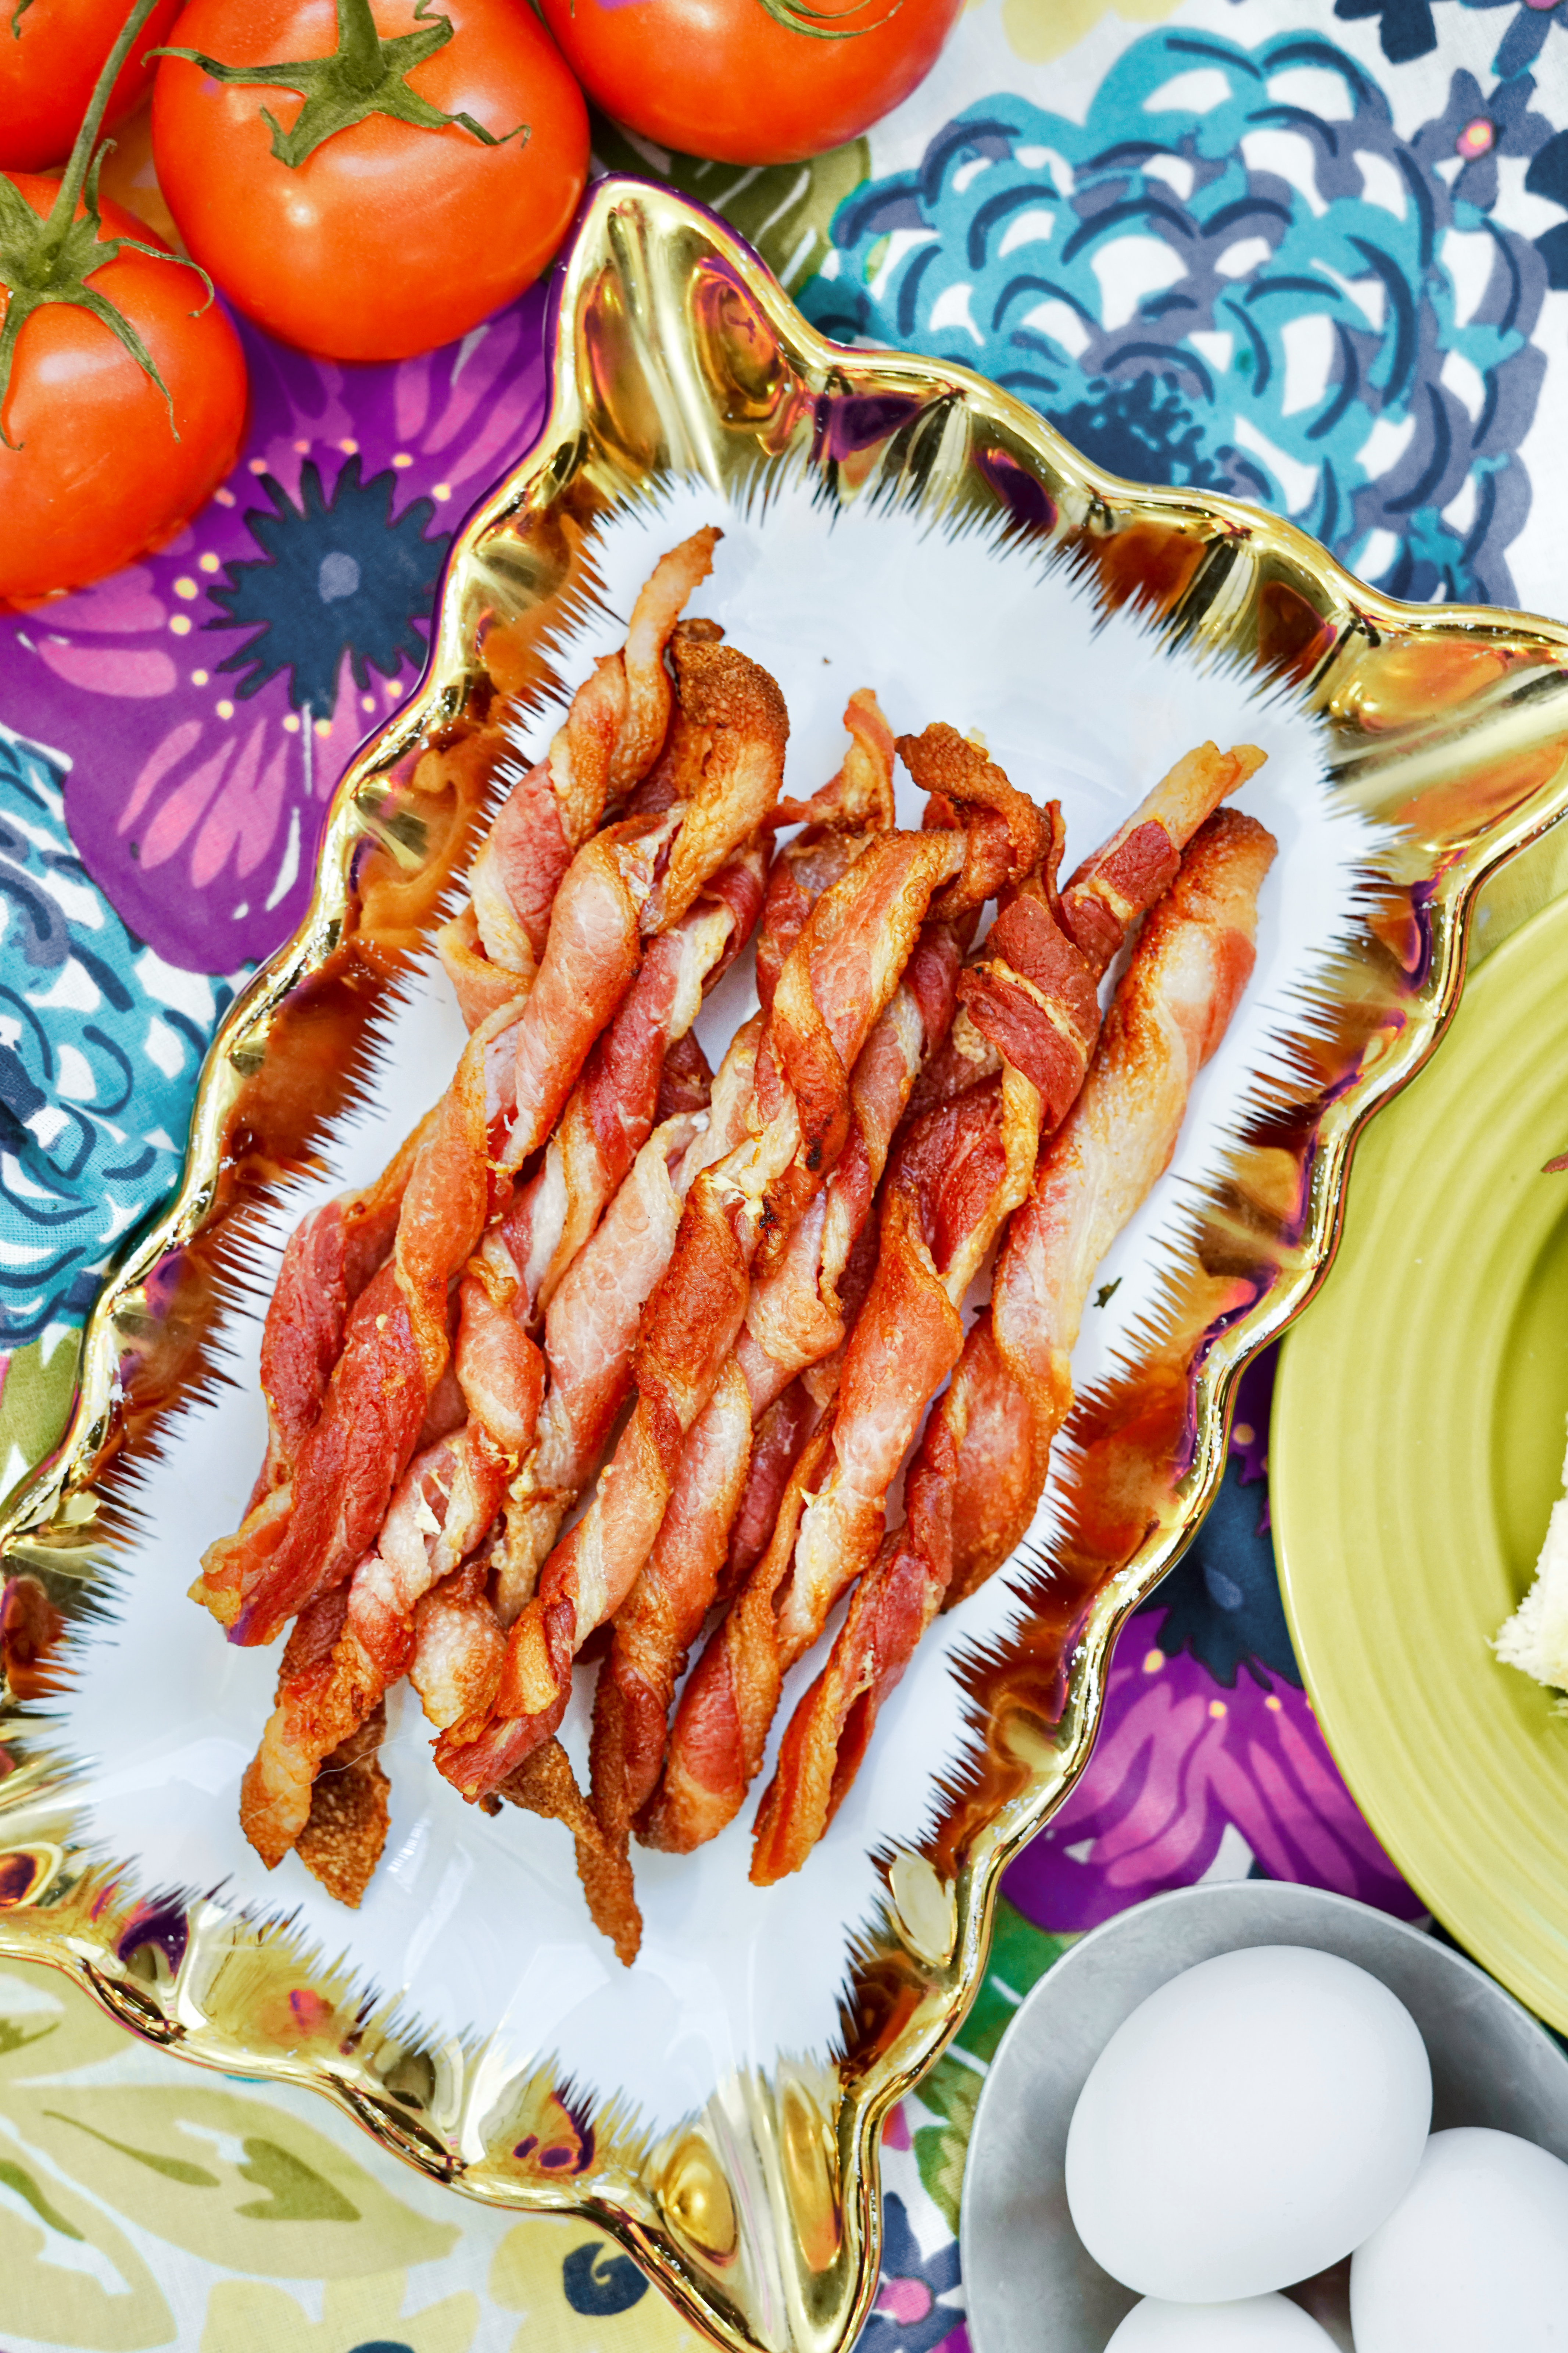 Platter of air fried bacon twists on a colorful tablecloth near tomatoes and eggs.